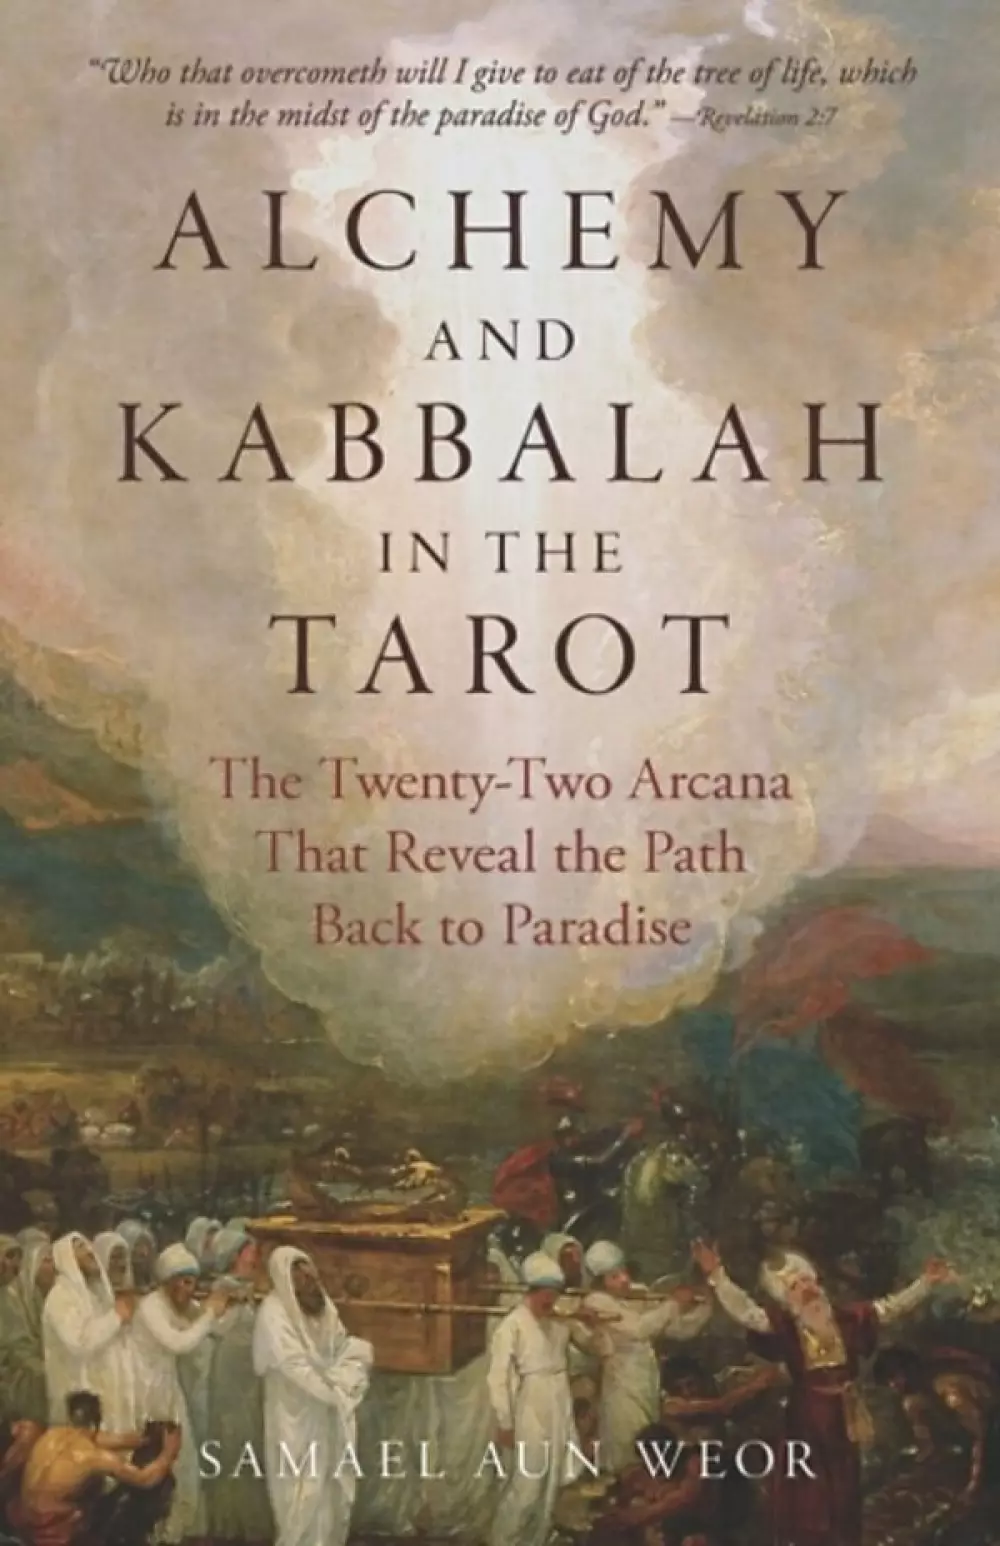 Imprint : Glorian Publishing Publication Date : 18/03/2022 Isbn : 9781943358168 Total Pages : 244 Dimensions : 152 x 229 Format : Paperback / softback Author : Samael Aun Weor Share: ALCHEMY AND KABBALAH IN THE TAROT, Bøker, Tarot, The Twenty-Two Arcana that Reveal The Path Back to Paradise